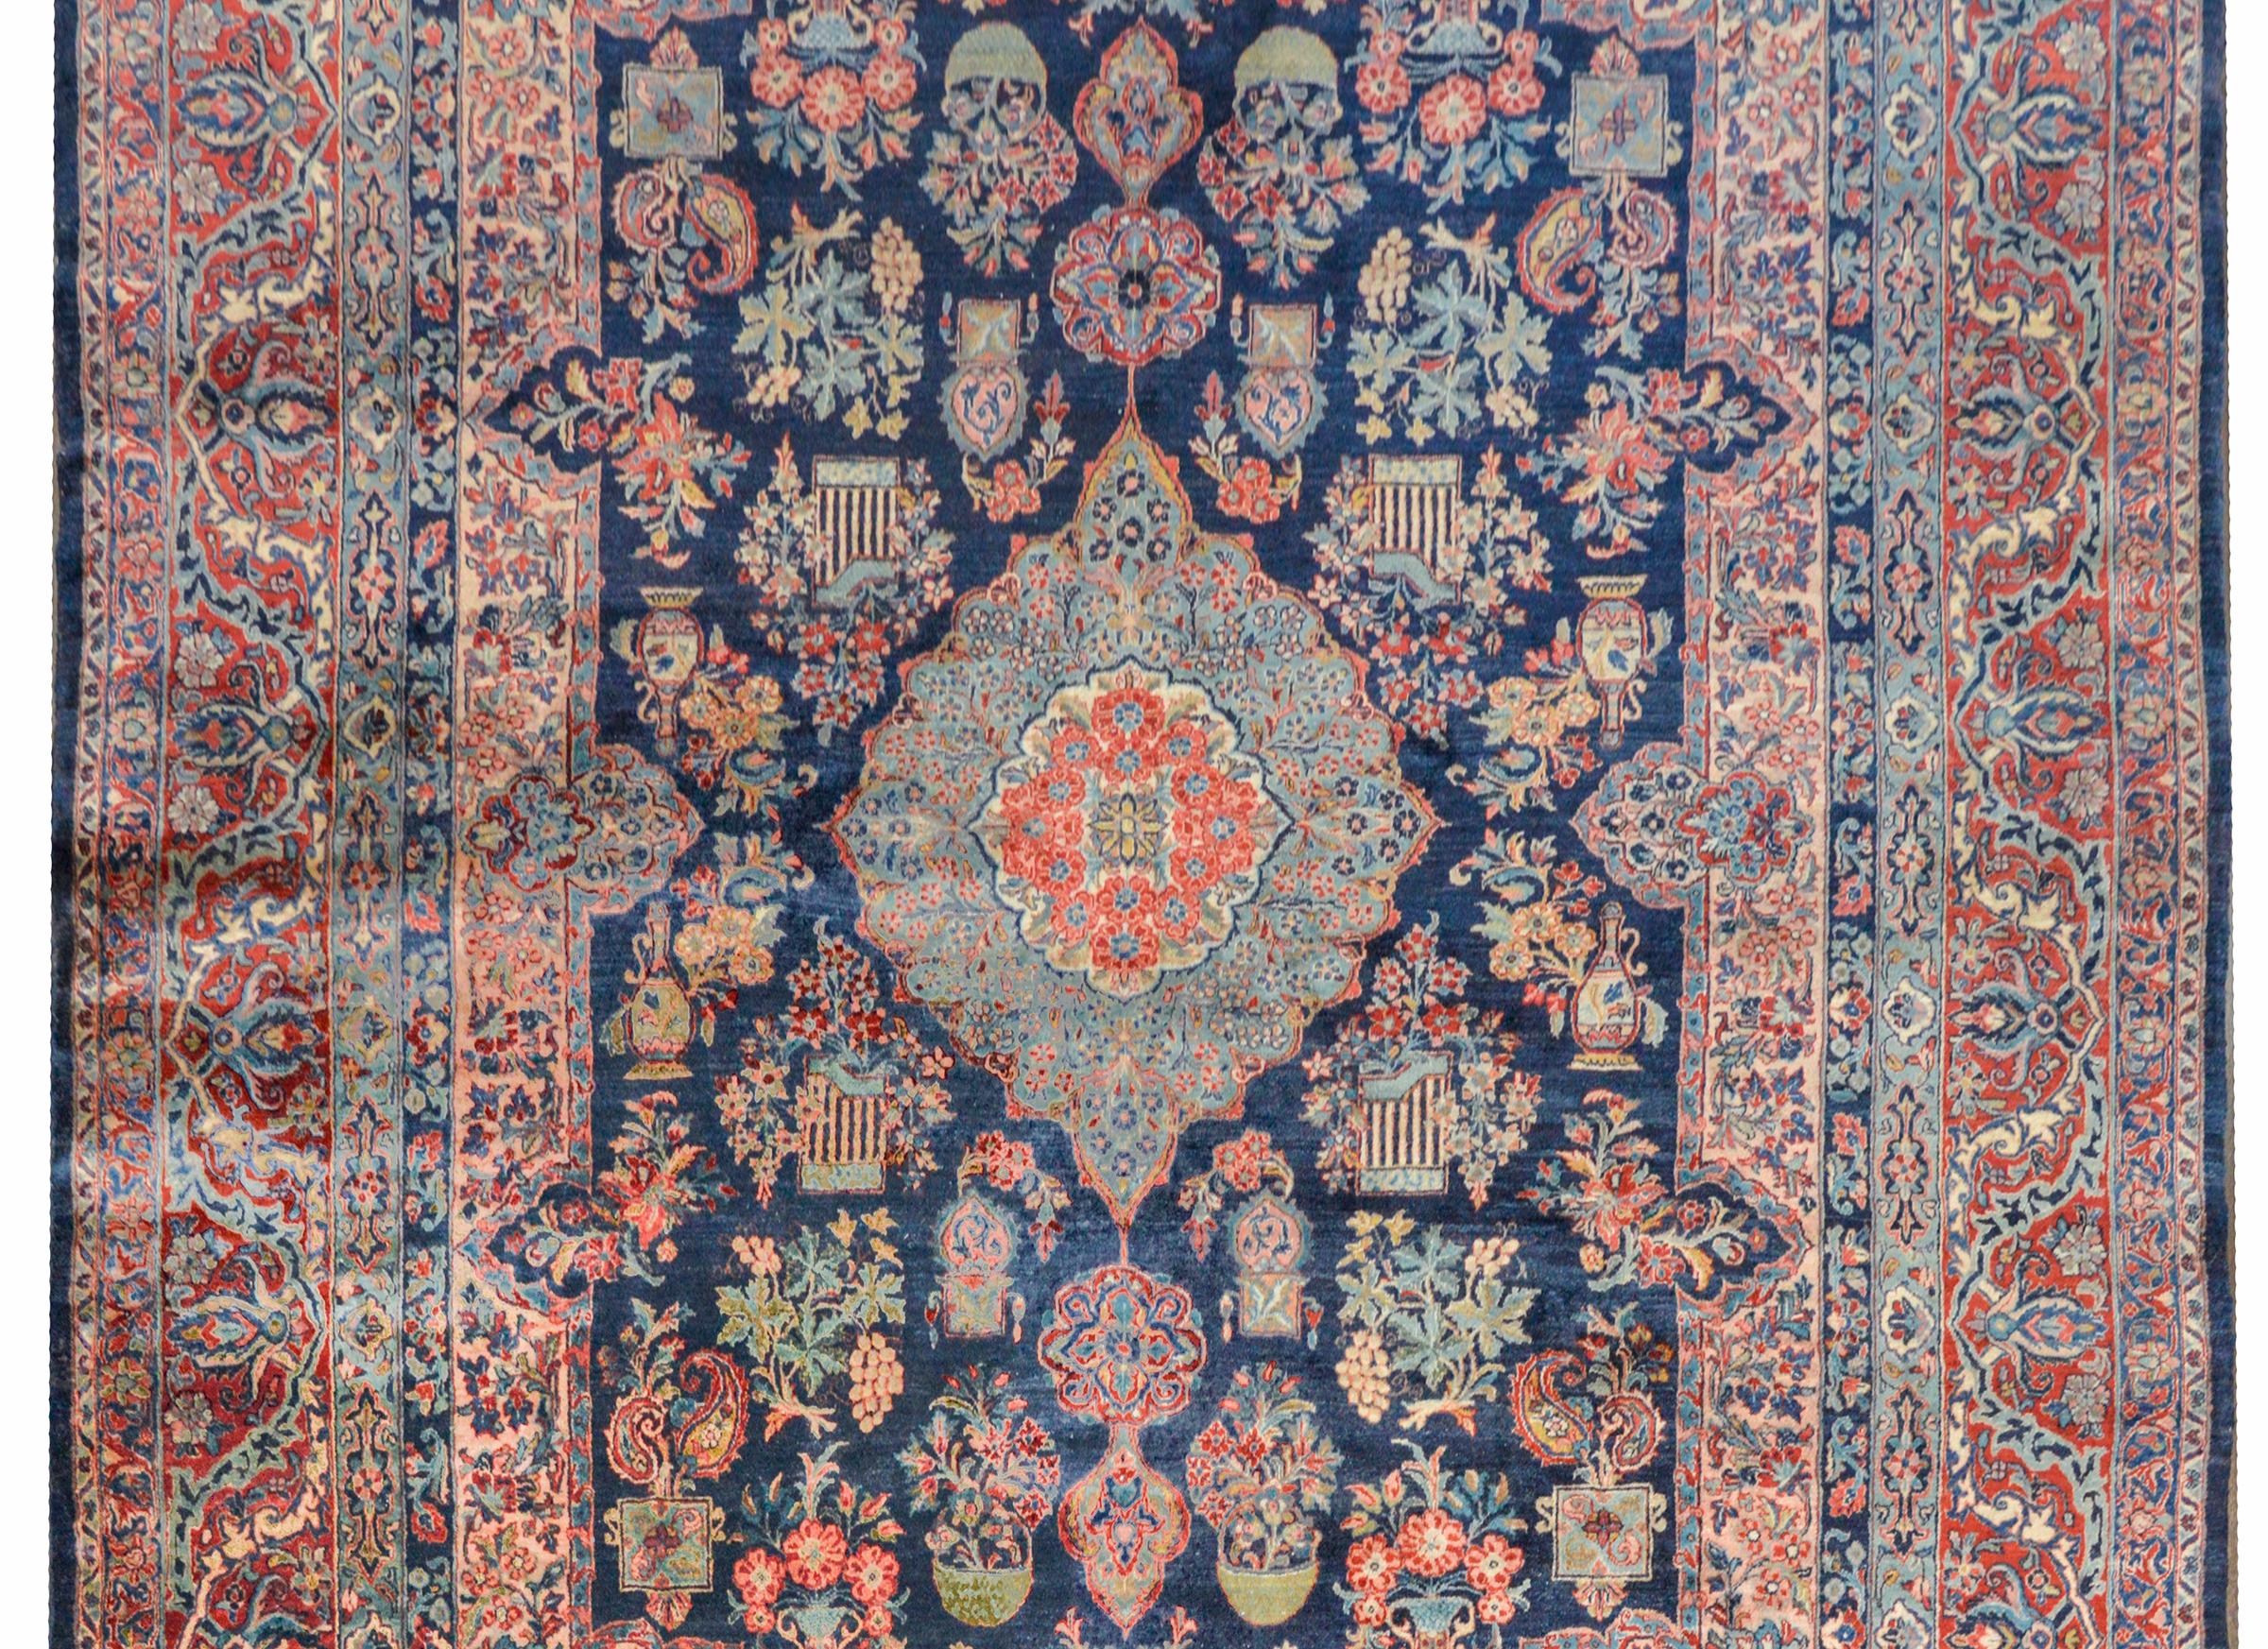 An incredible early 20th century Persian Kashan rug with a fantastic pattern of myriad potted plants and flowers woven in crimson, indigo, pink, pale green, cream, and gold on a dark indigo background. The border is complex with a wide central